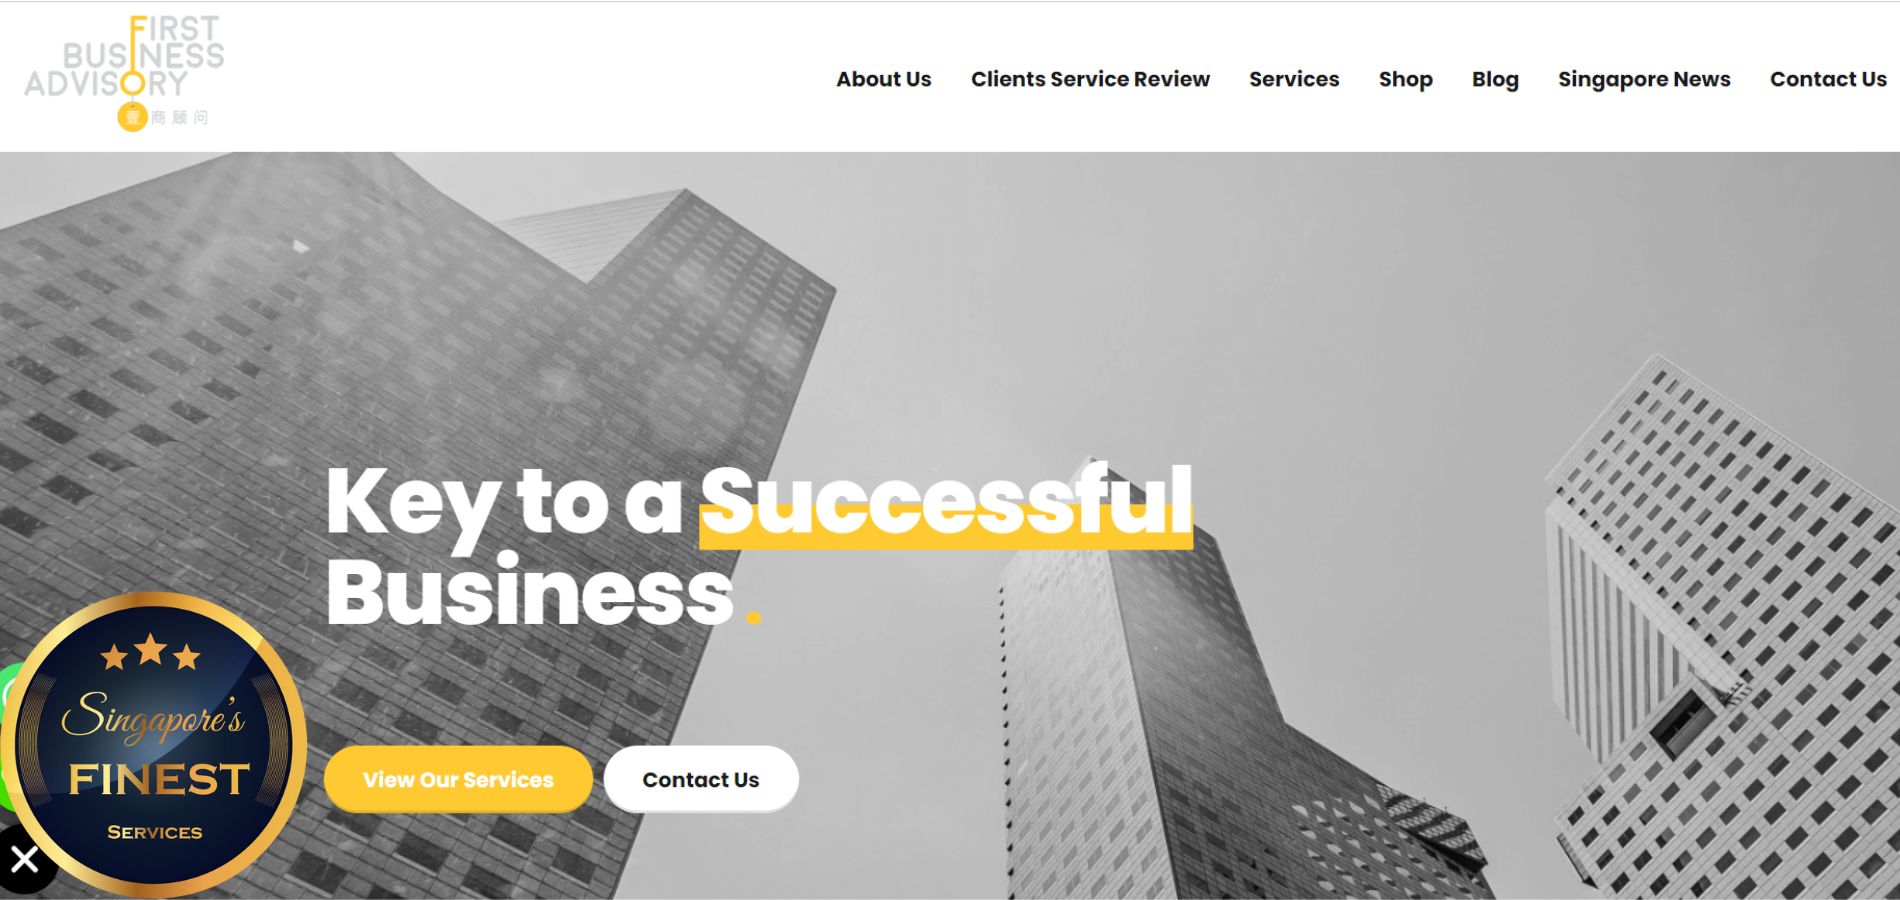 FIRST BUSINESS CONSULTANTS PTE LTD - Business Consultants in Singapore